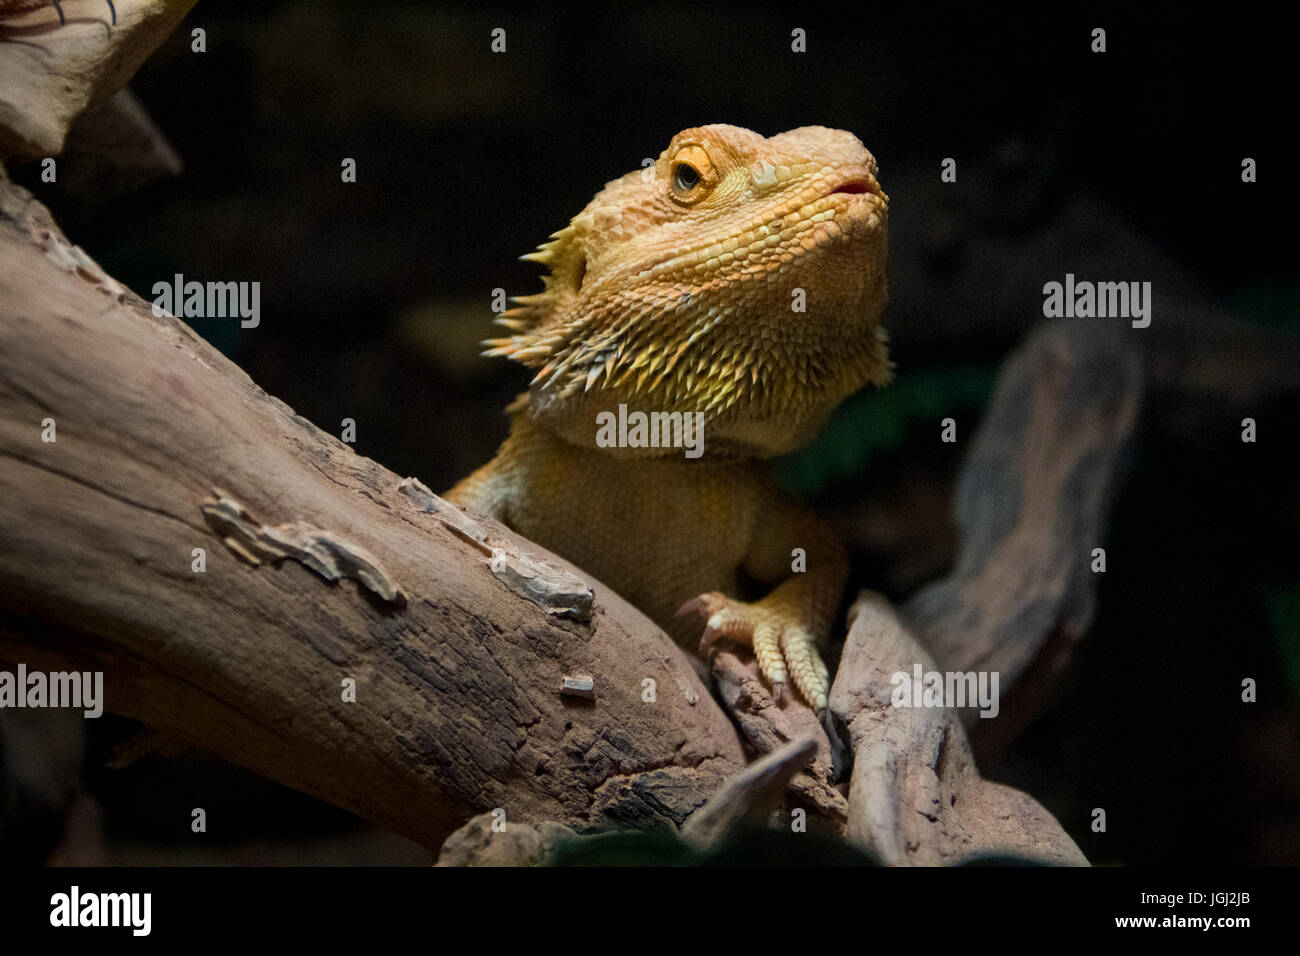 Close-up shot of eastern bearded dragon - an agamid lizard. Stock Photo